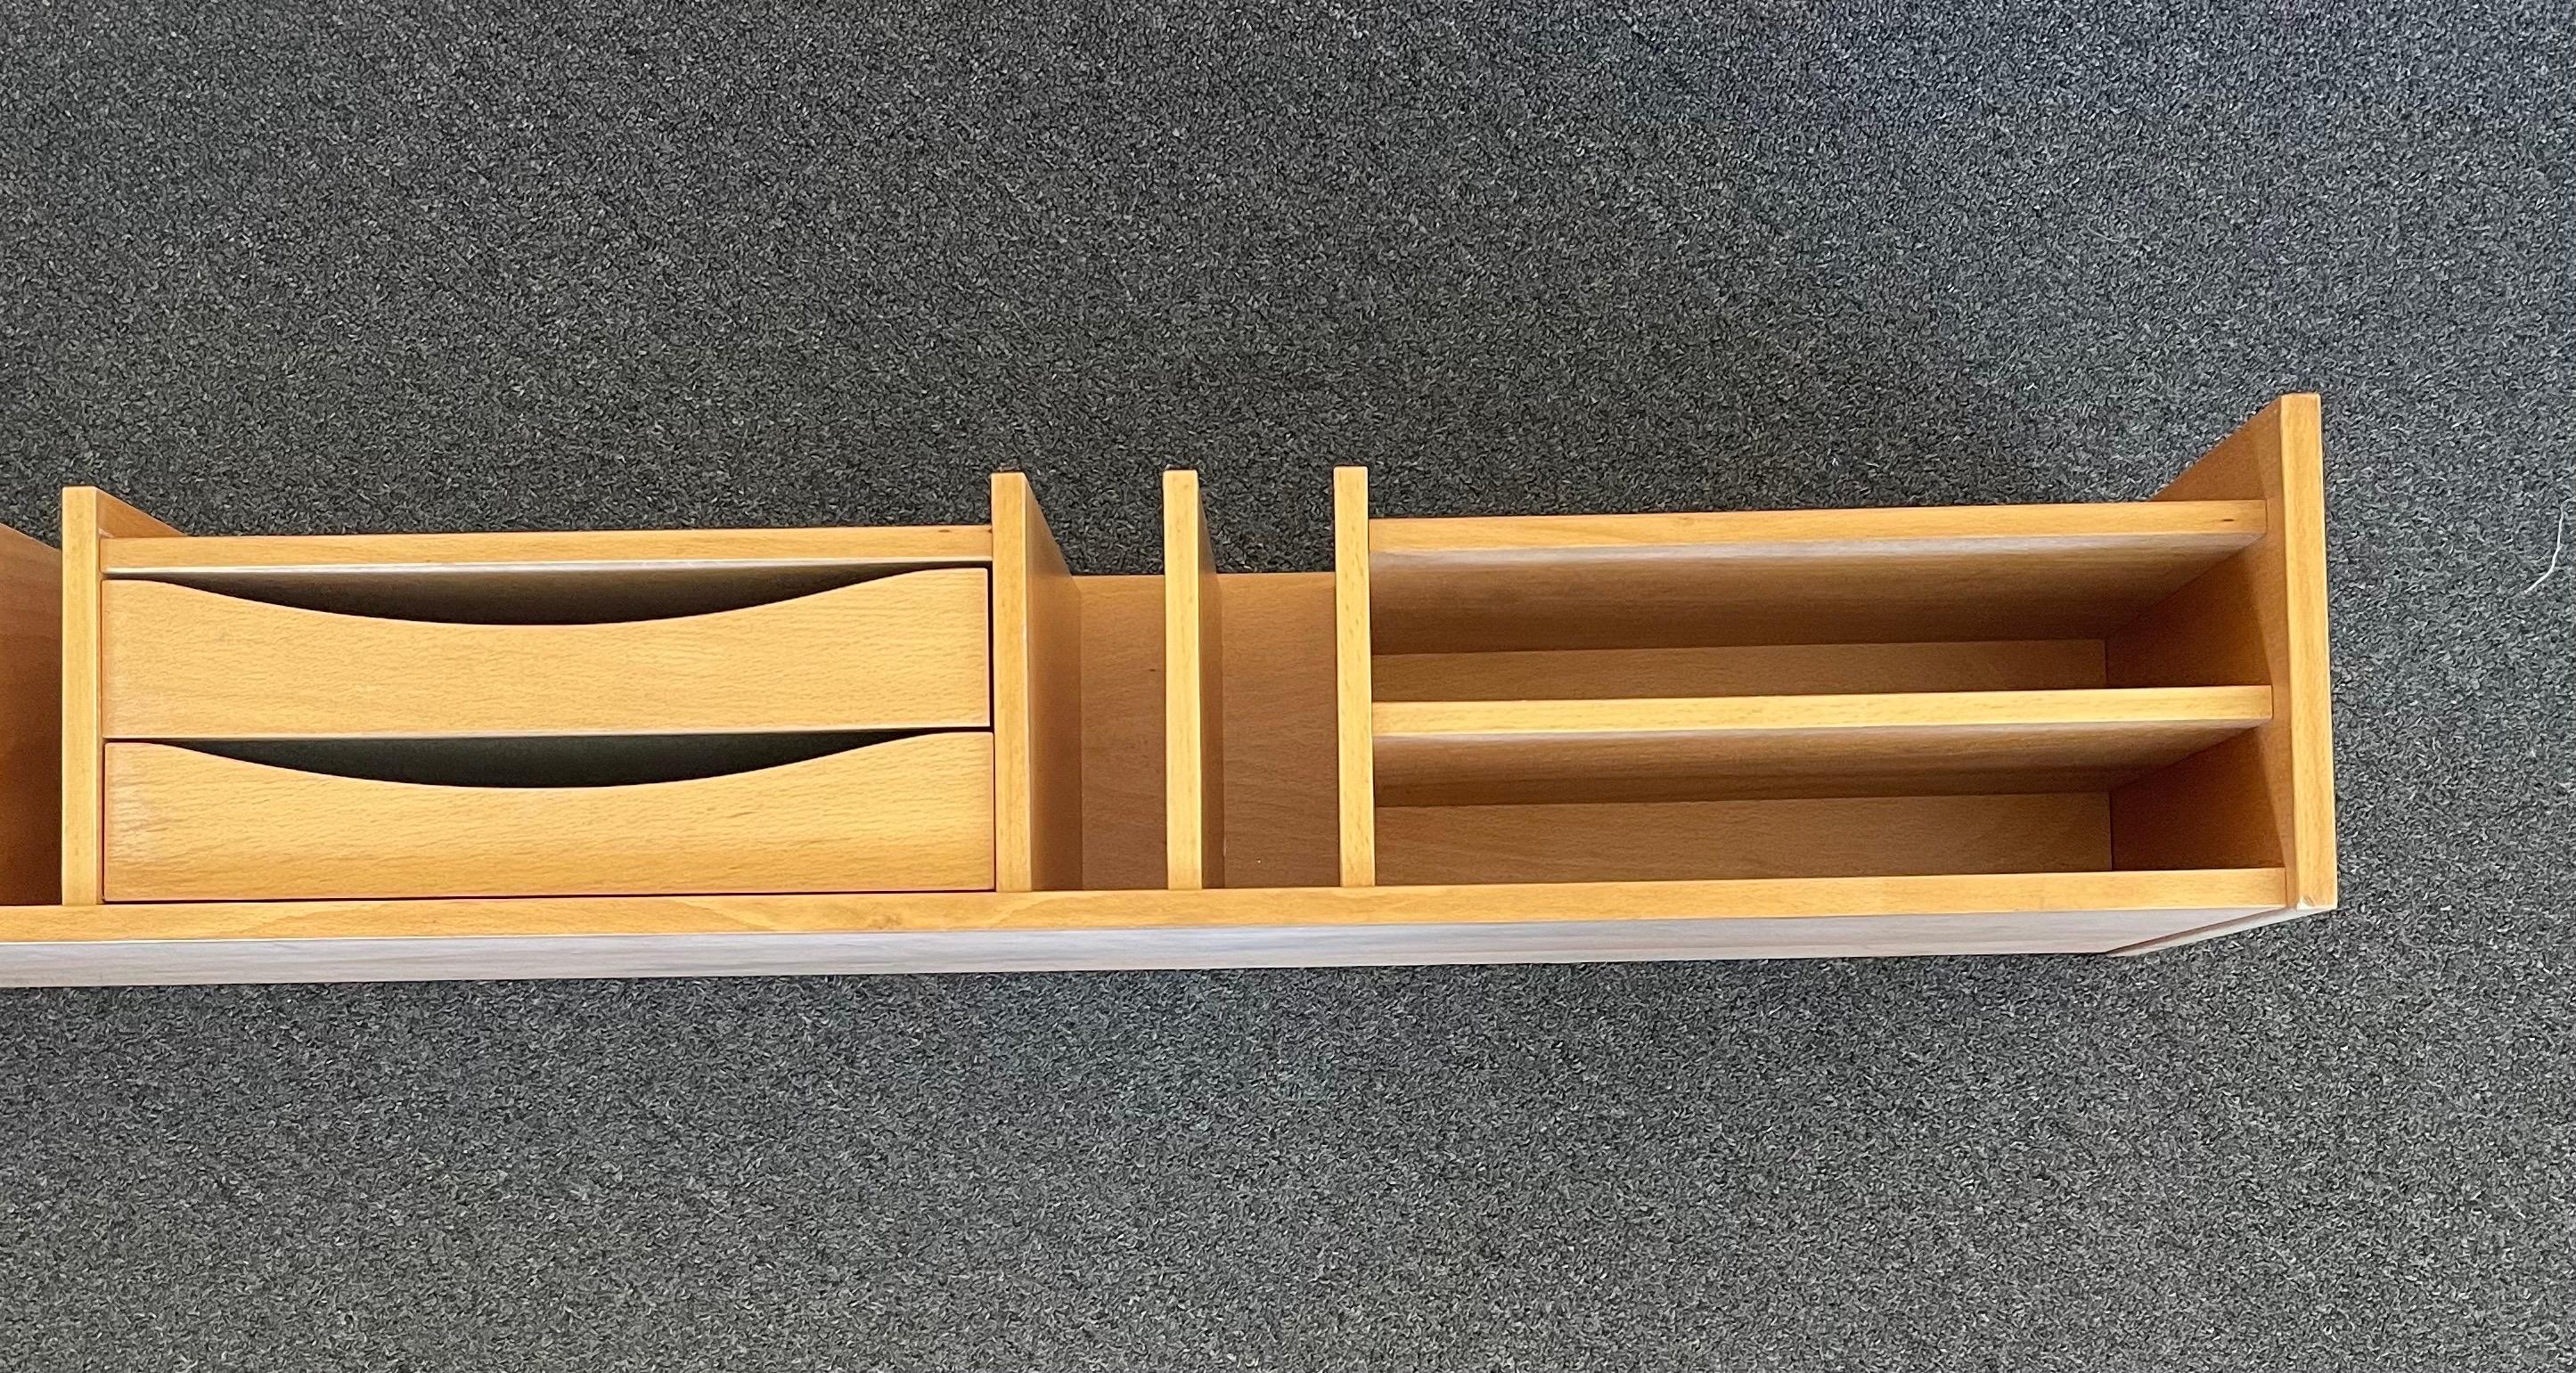 Extra Large Desk Organizer or Letter Tray in Teak by Pedersen & Hansen In Good Condition For Sale In San Diego, CA